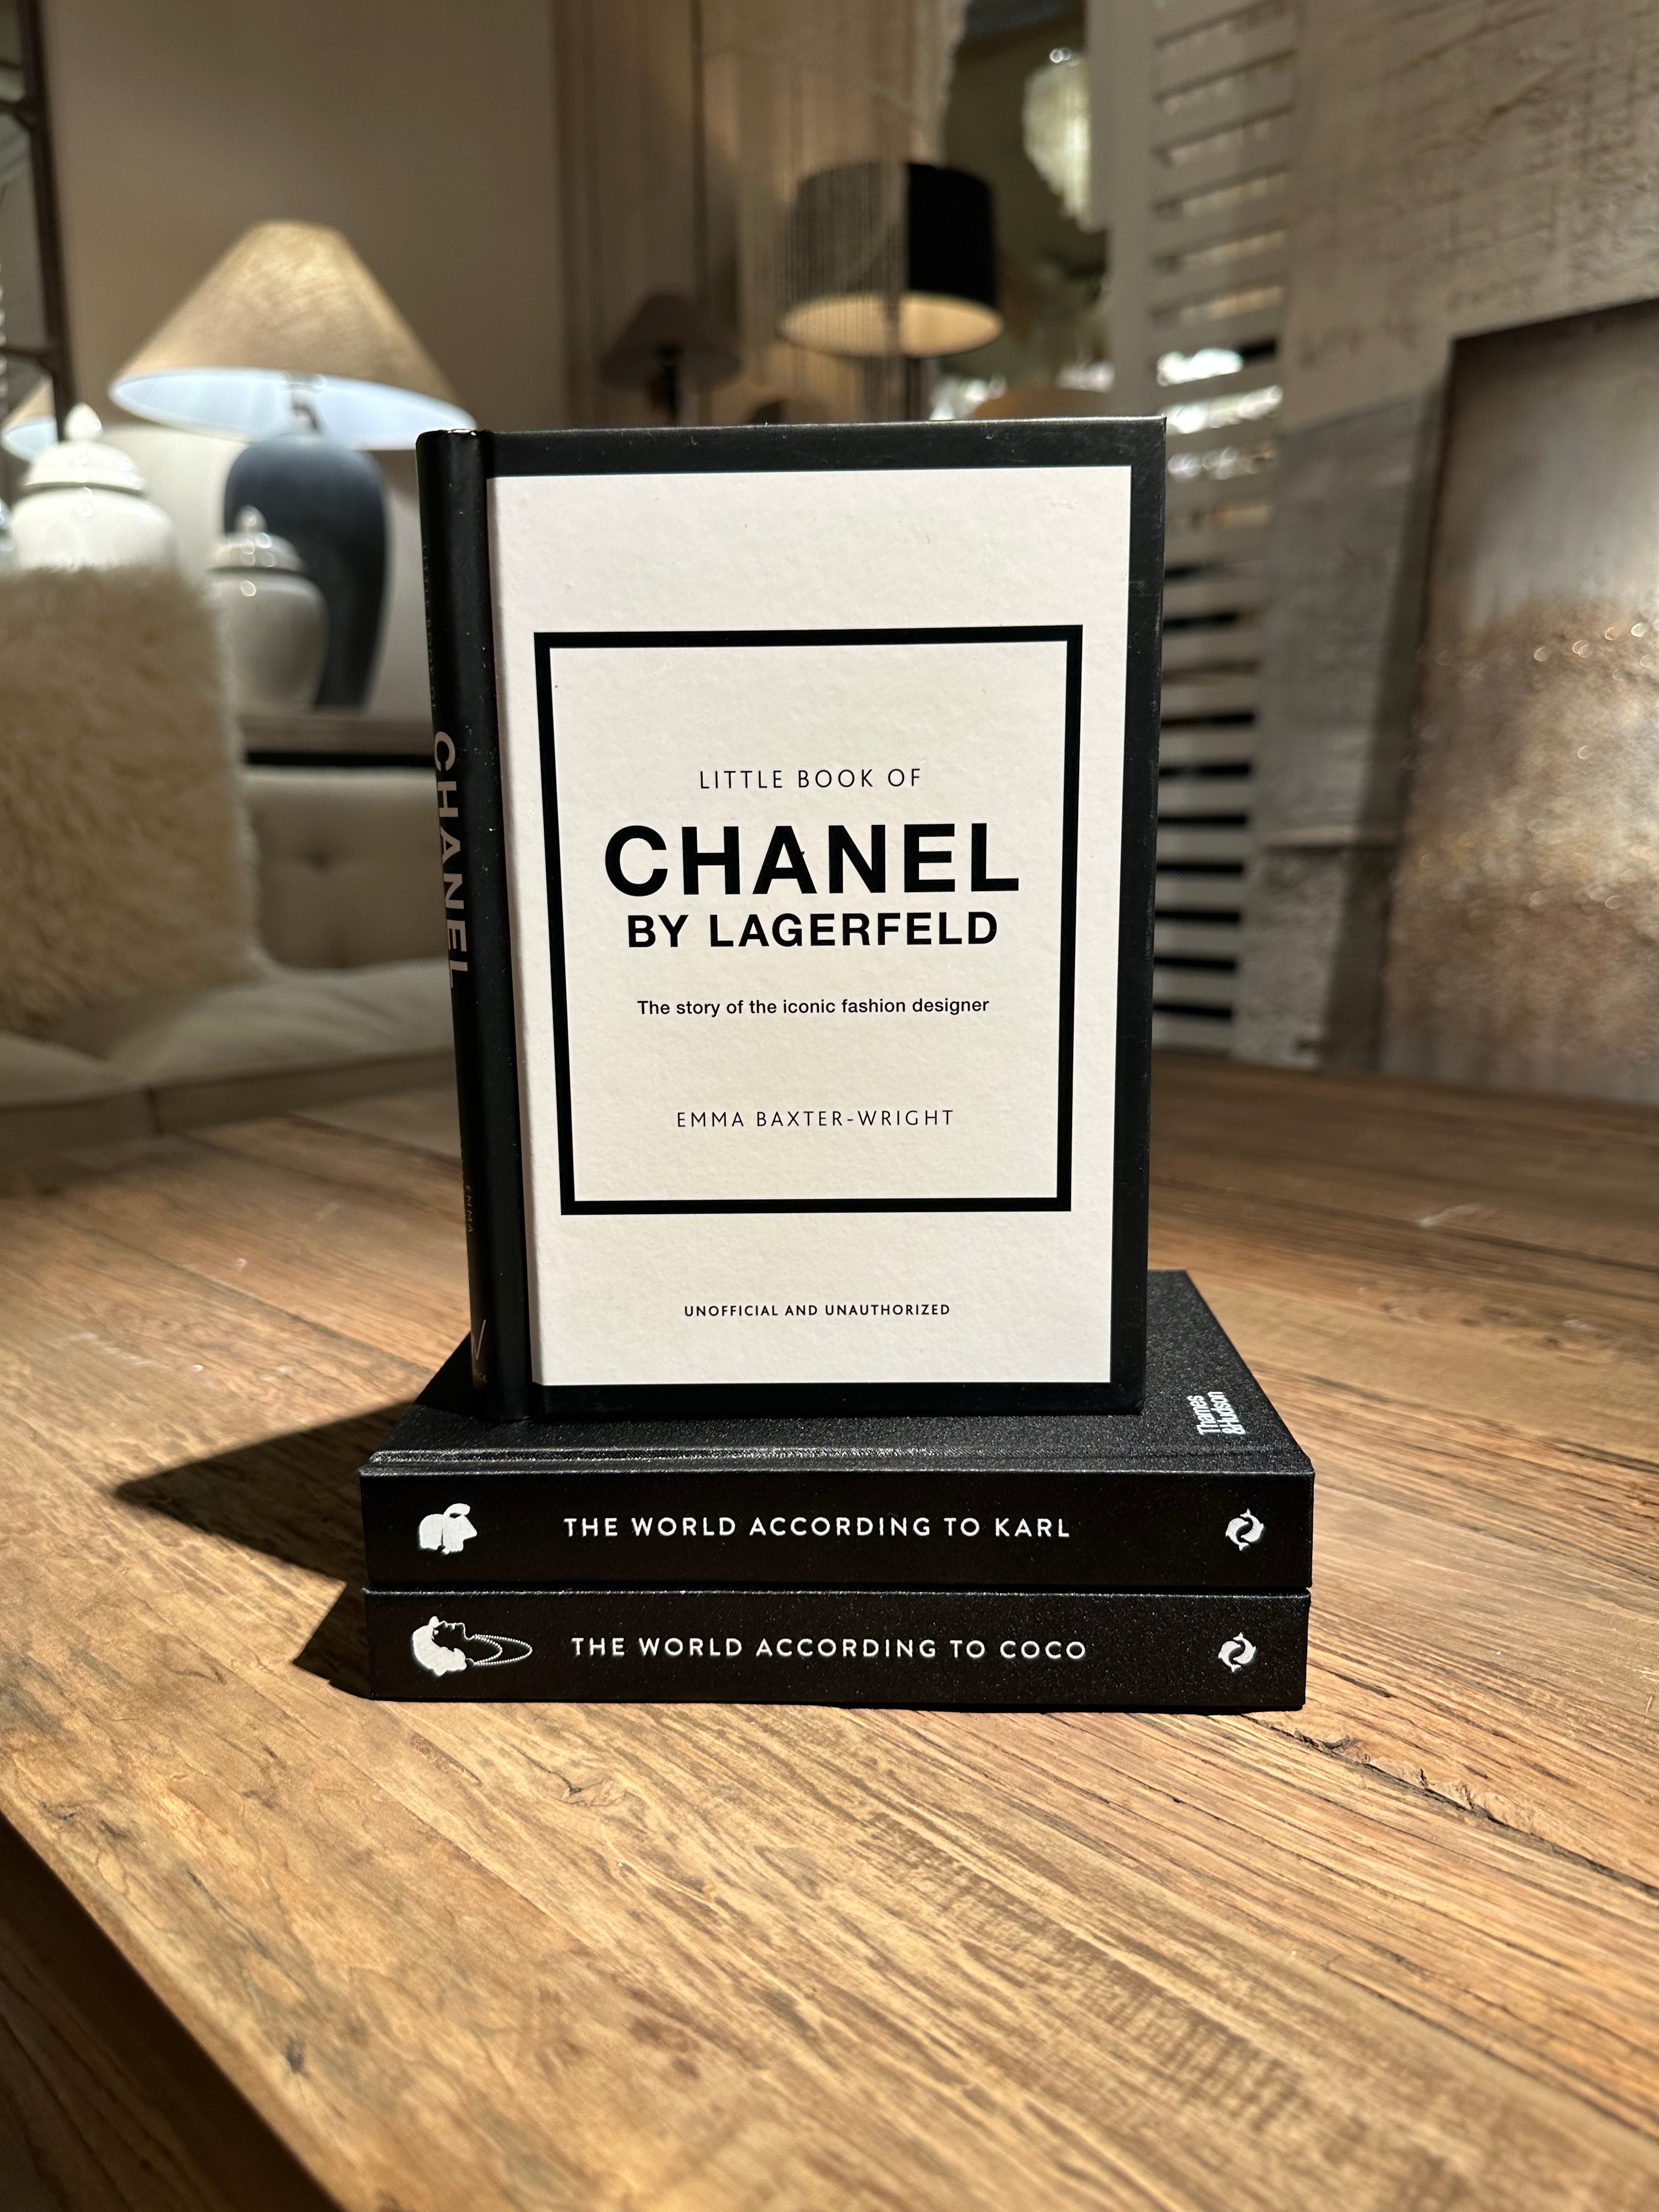 The Little Book of Chanel (Little Books of Fashion, 3)